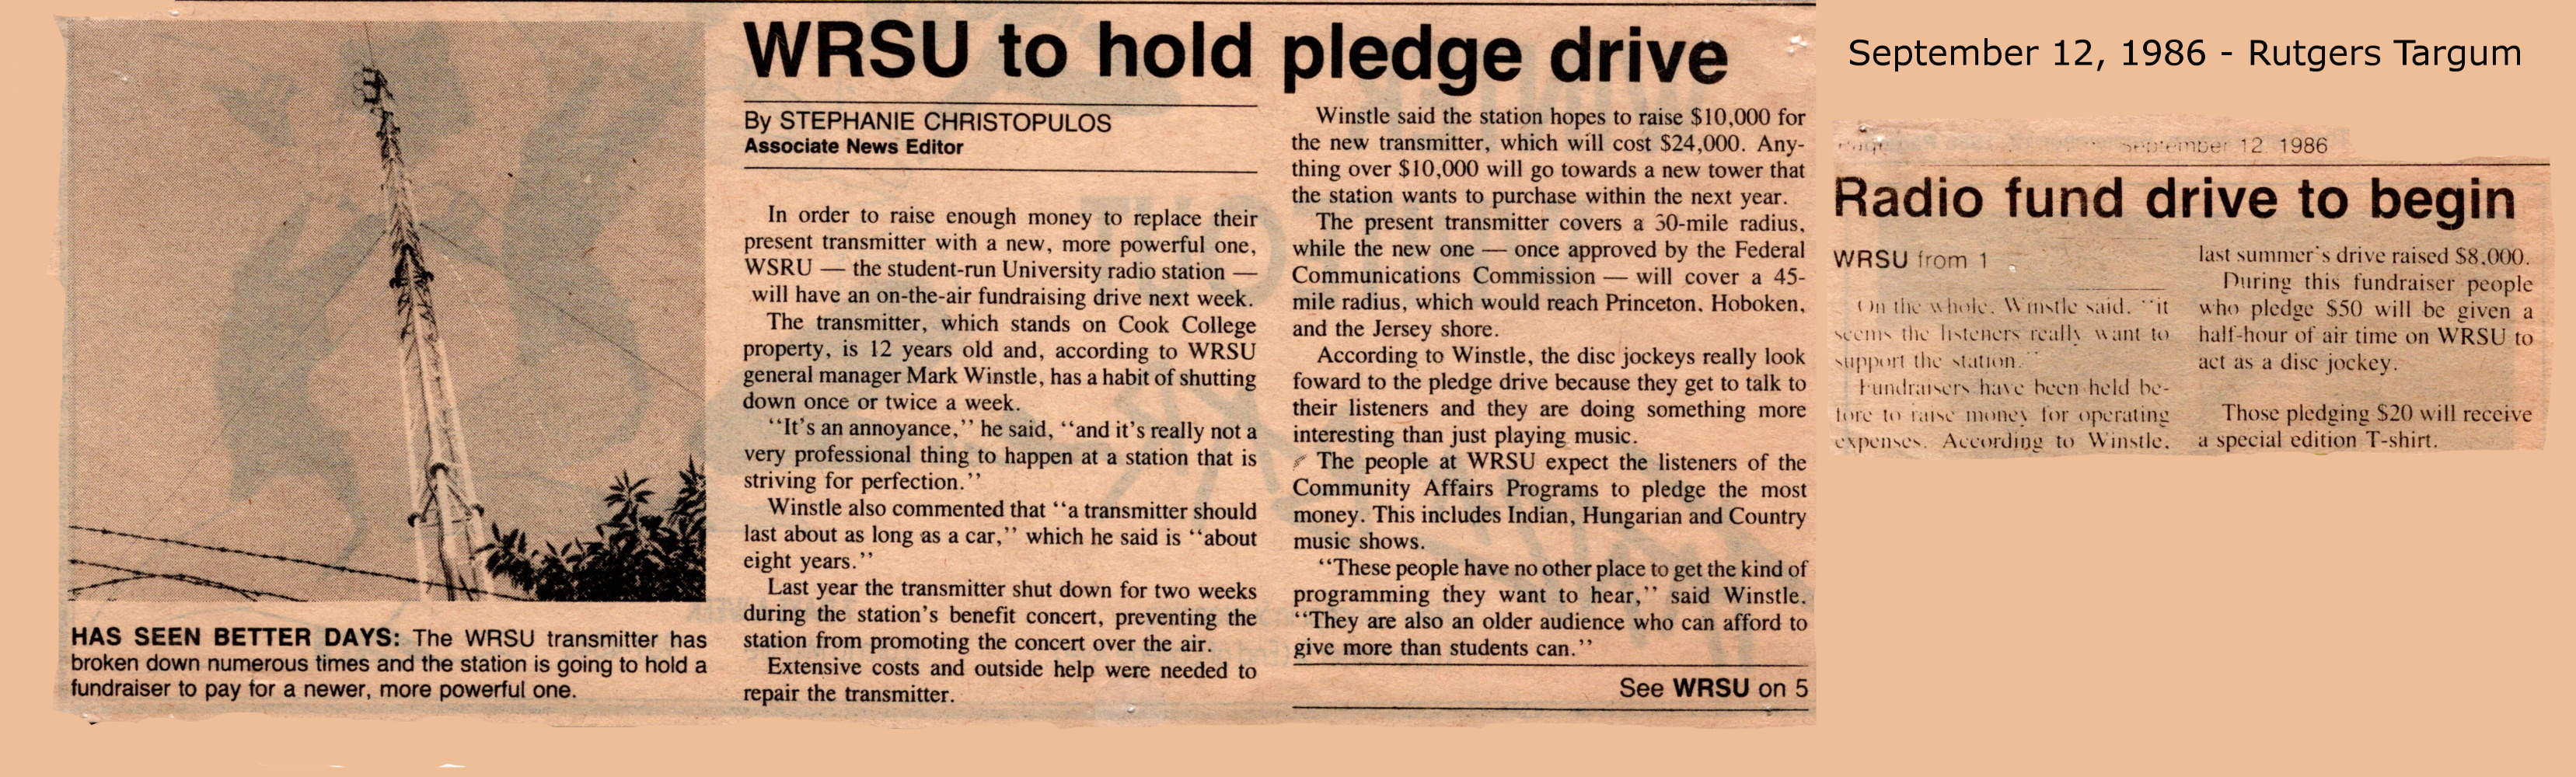 1986 - Pledge Drive for the NEW transmitter - This transmitter served until 2017 - It was taken out working...